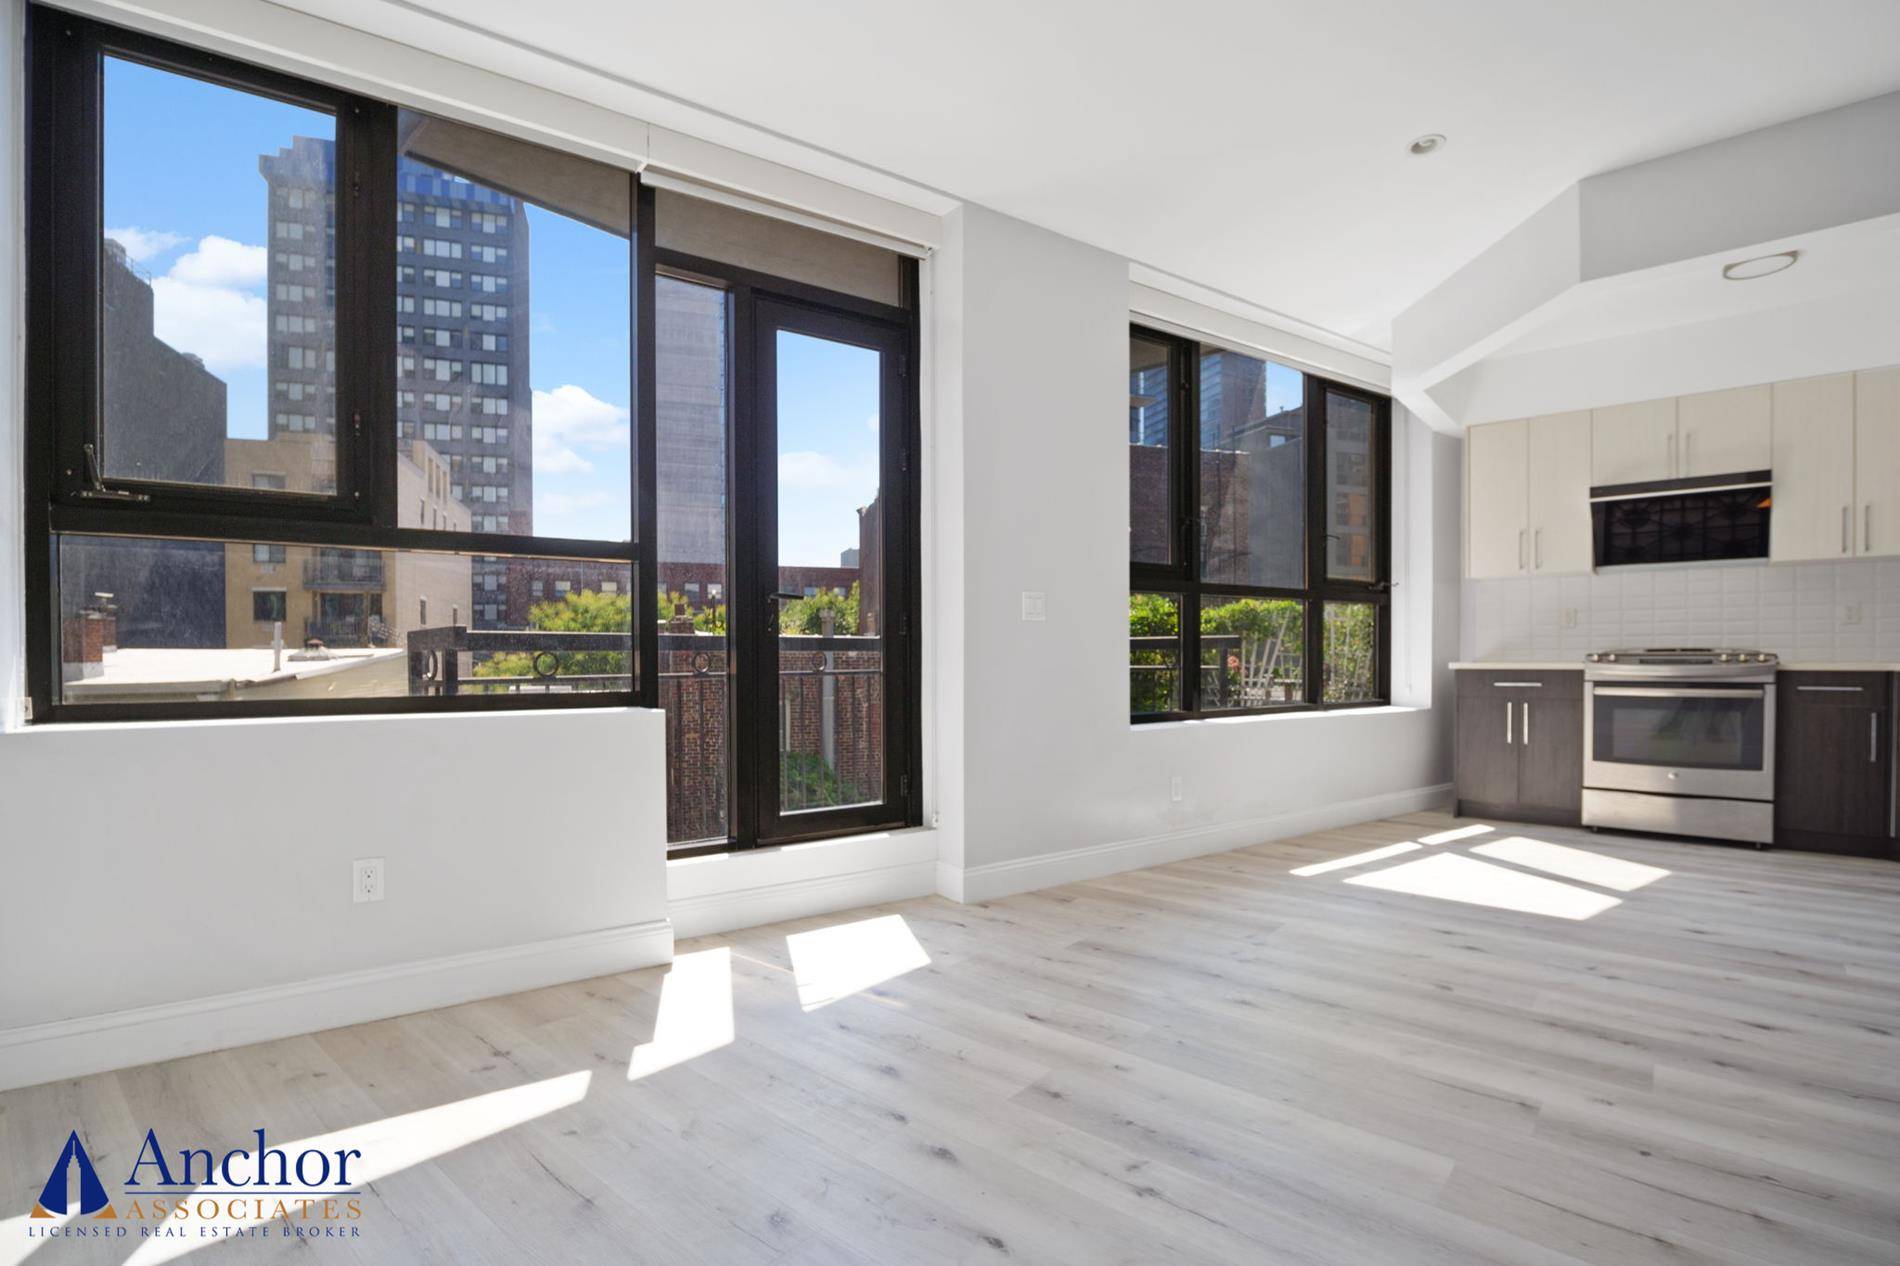 Enter a beautiful open space, bathed in natural light coming through the HUGH WALL OF WINDOWS !